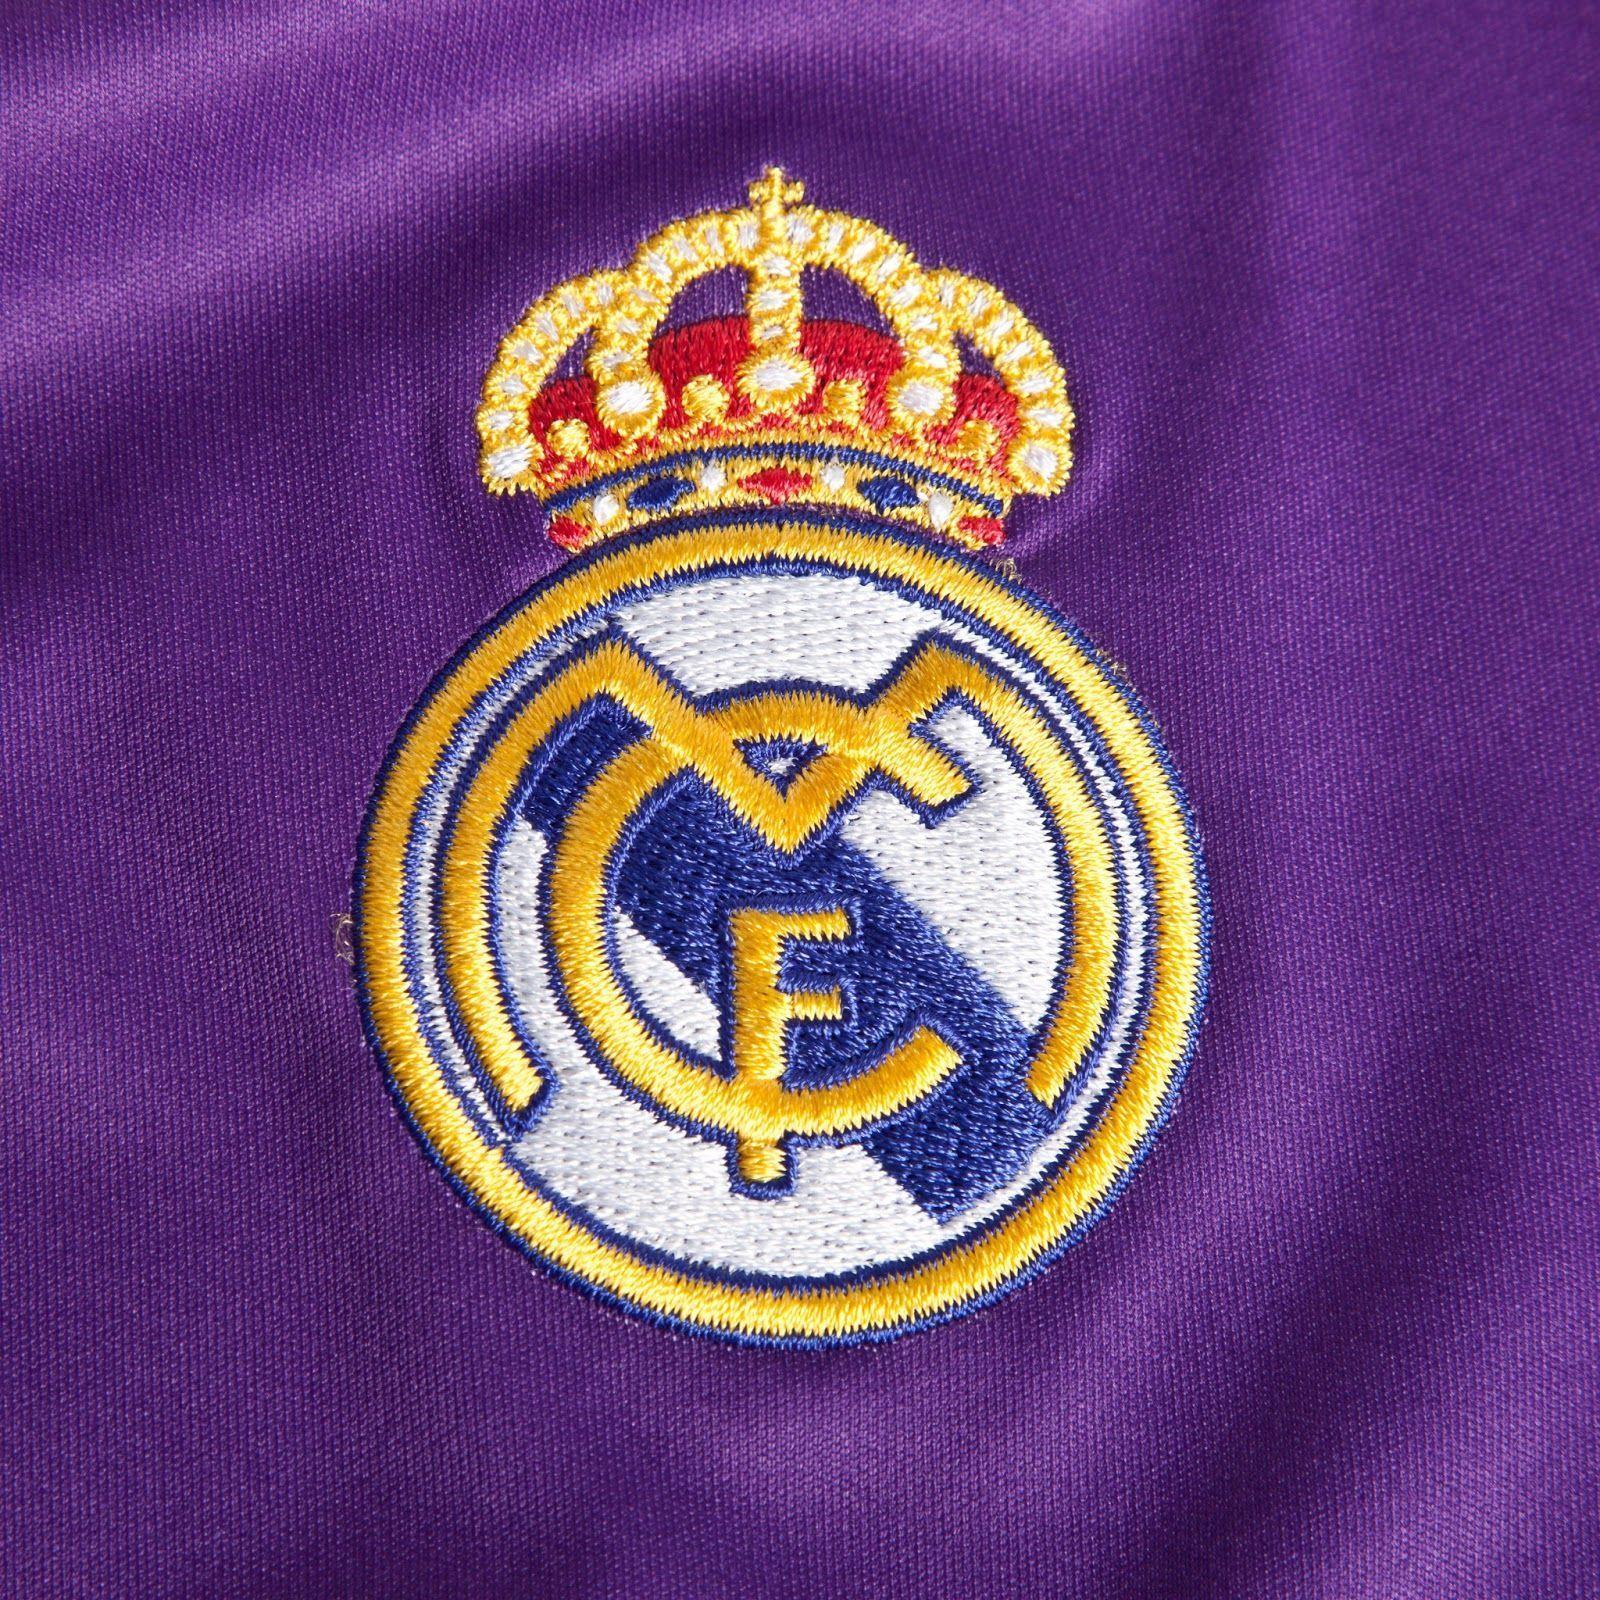 Real Madrid 13 14 Home, Away And Third Kits Released